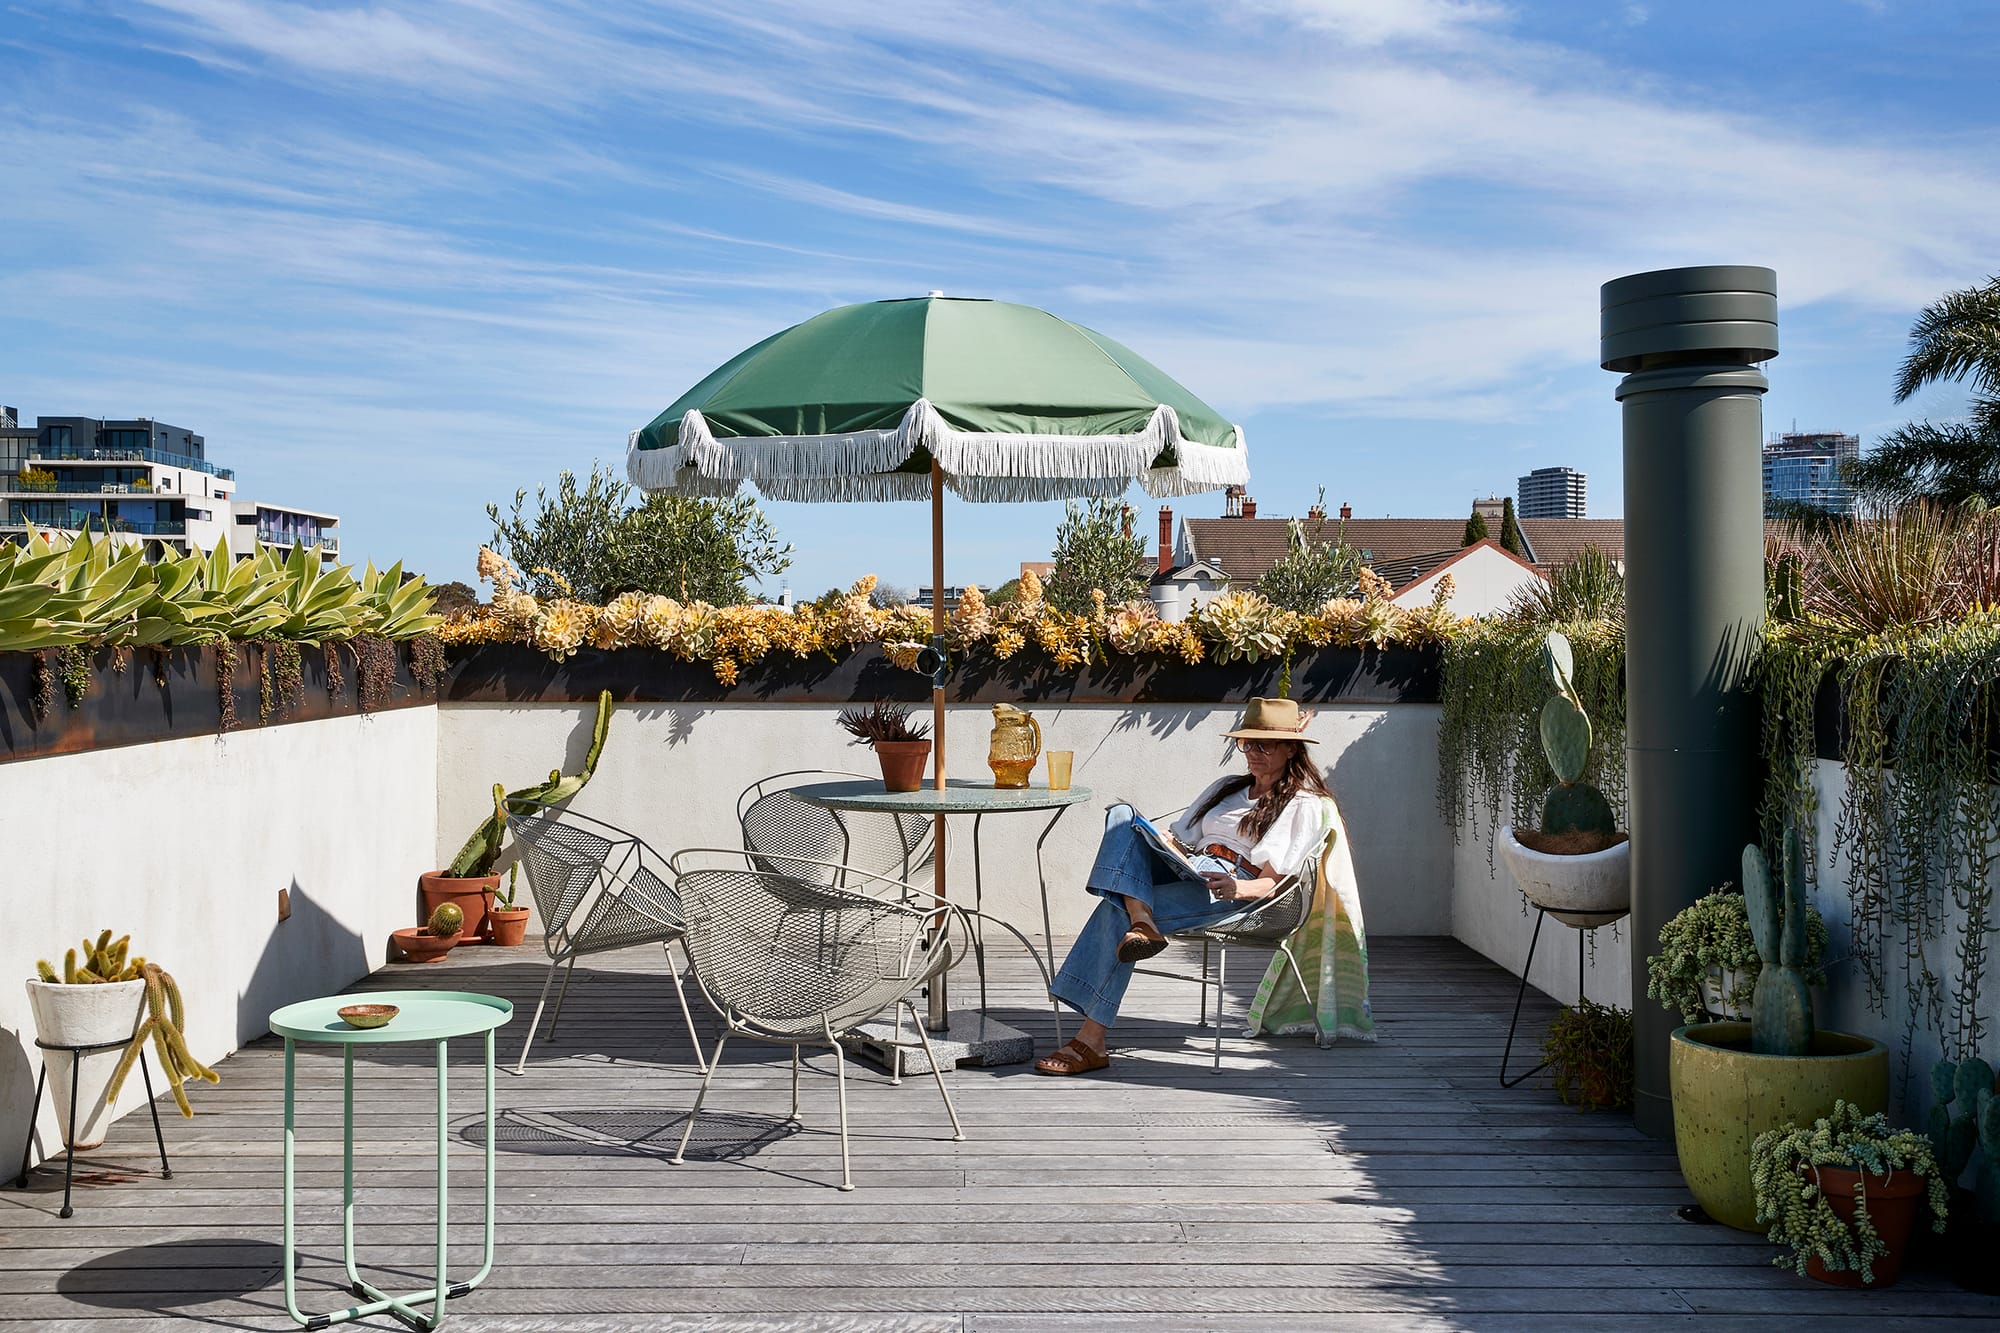 Fabrica by mcmahon and nerlich. Photography by Shannon McGrath. Rooftop terrace with weathered timber floors and white plastered half wall, topped with steel planters. Table with umbrella.